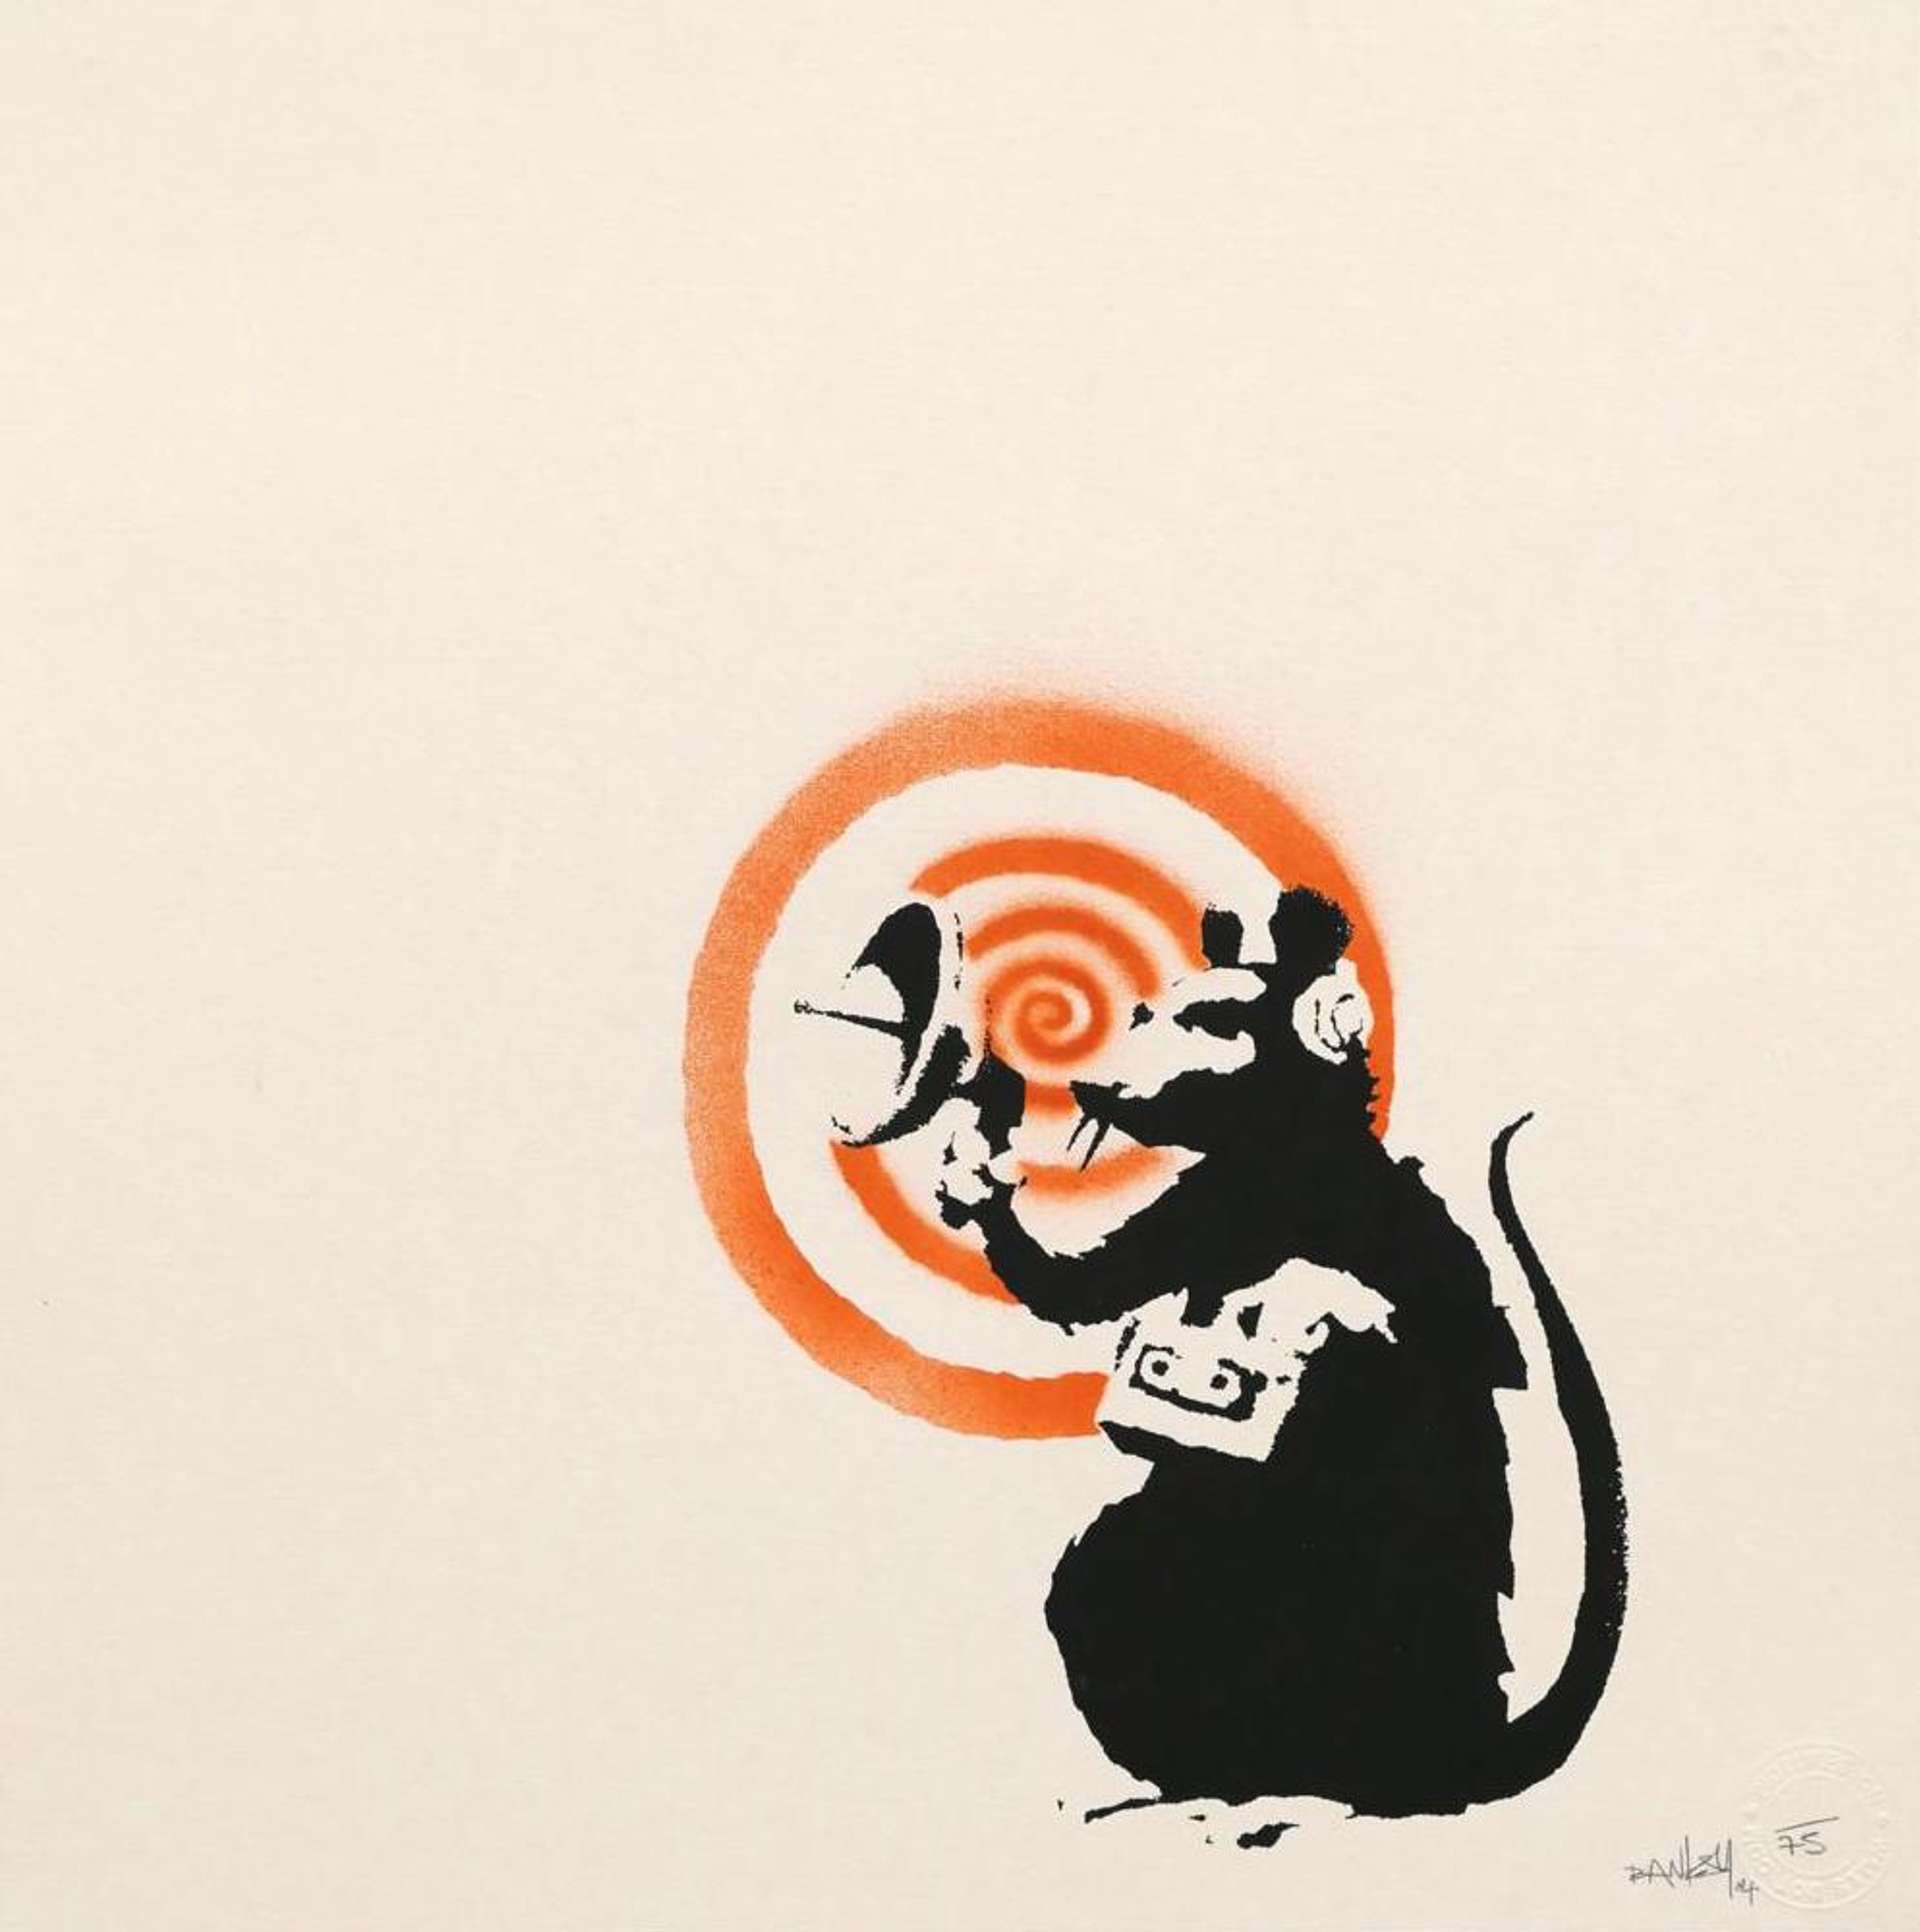 A screenprint by Banksy depicting a black and white rat holding up a megaphone with a red radar sign behind it, set against a white background.